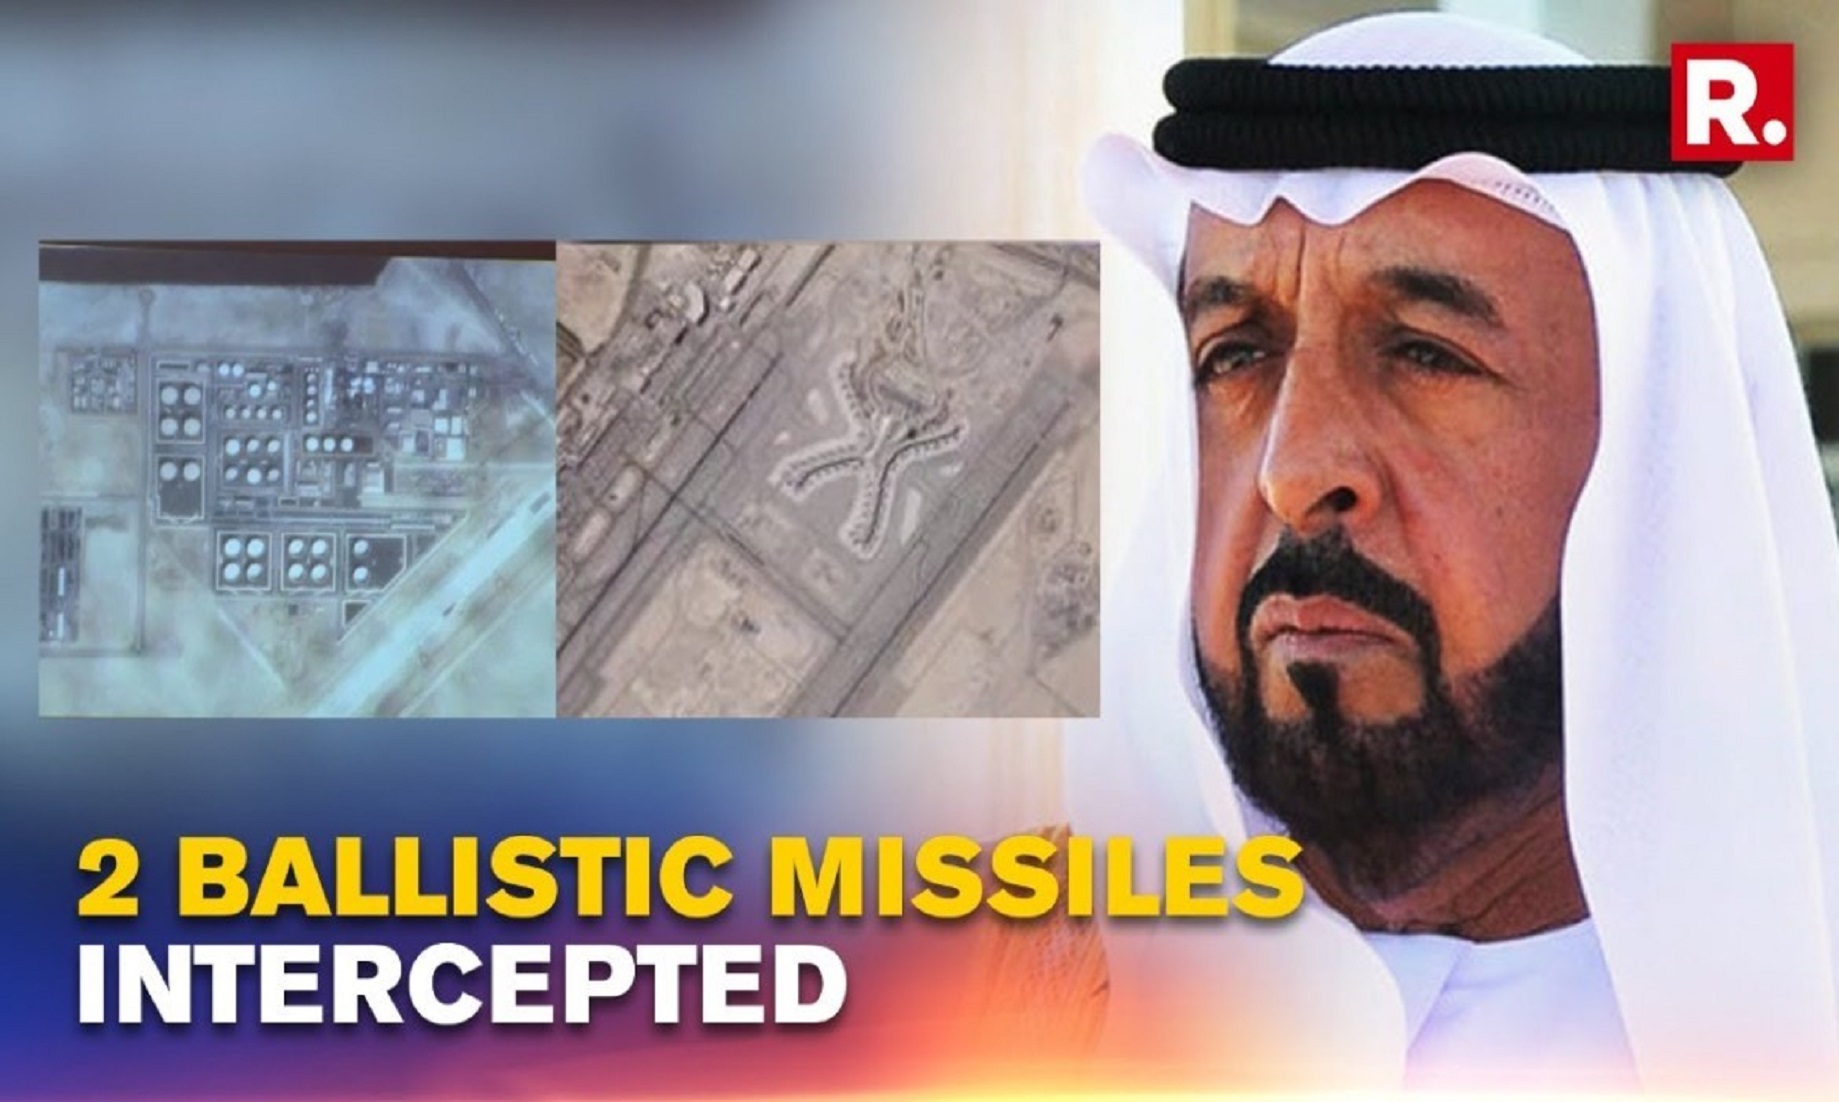 Ministry Of Defence Announces Interception Of Two Ballistic Missiles Fired By Houthi Militia Targeting UAE